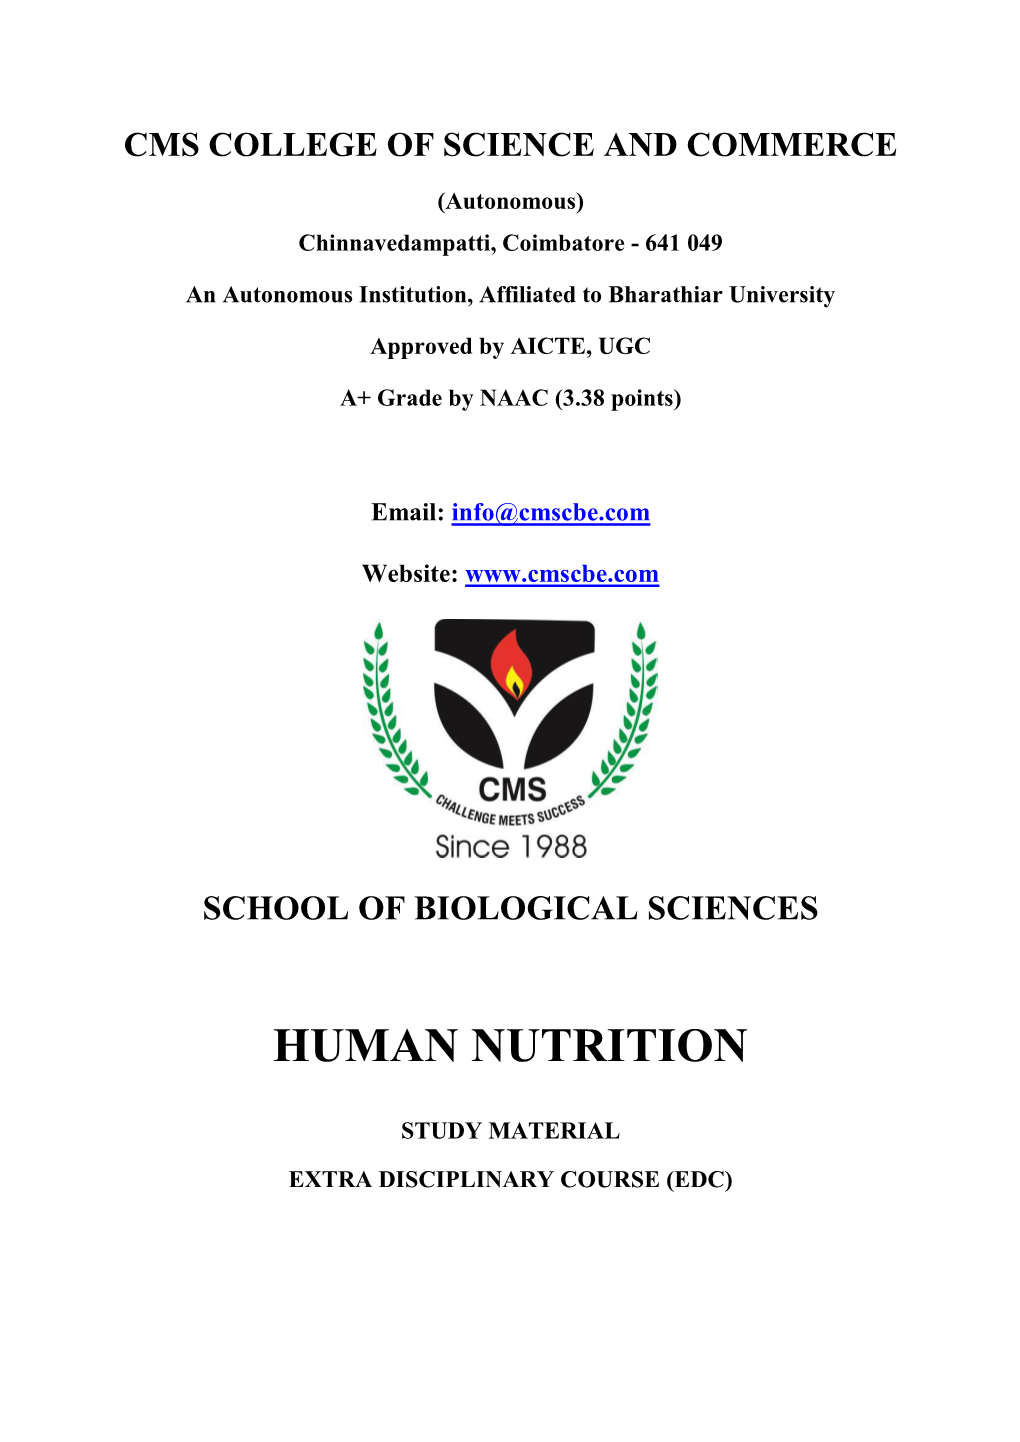 Study Material – Human Nutrition